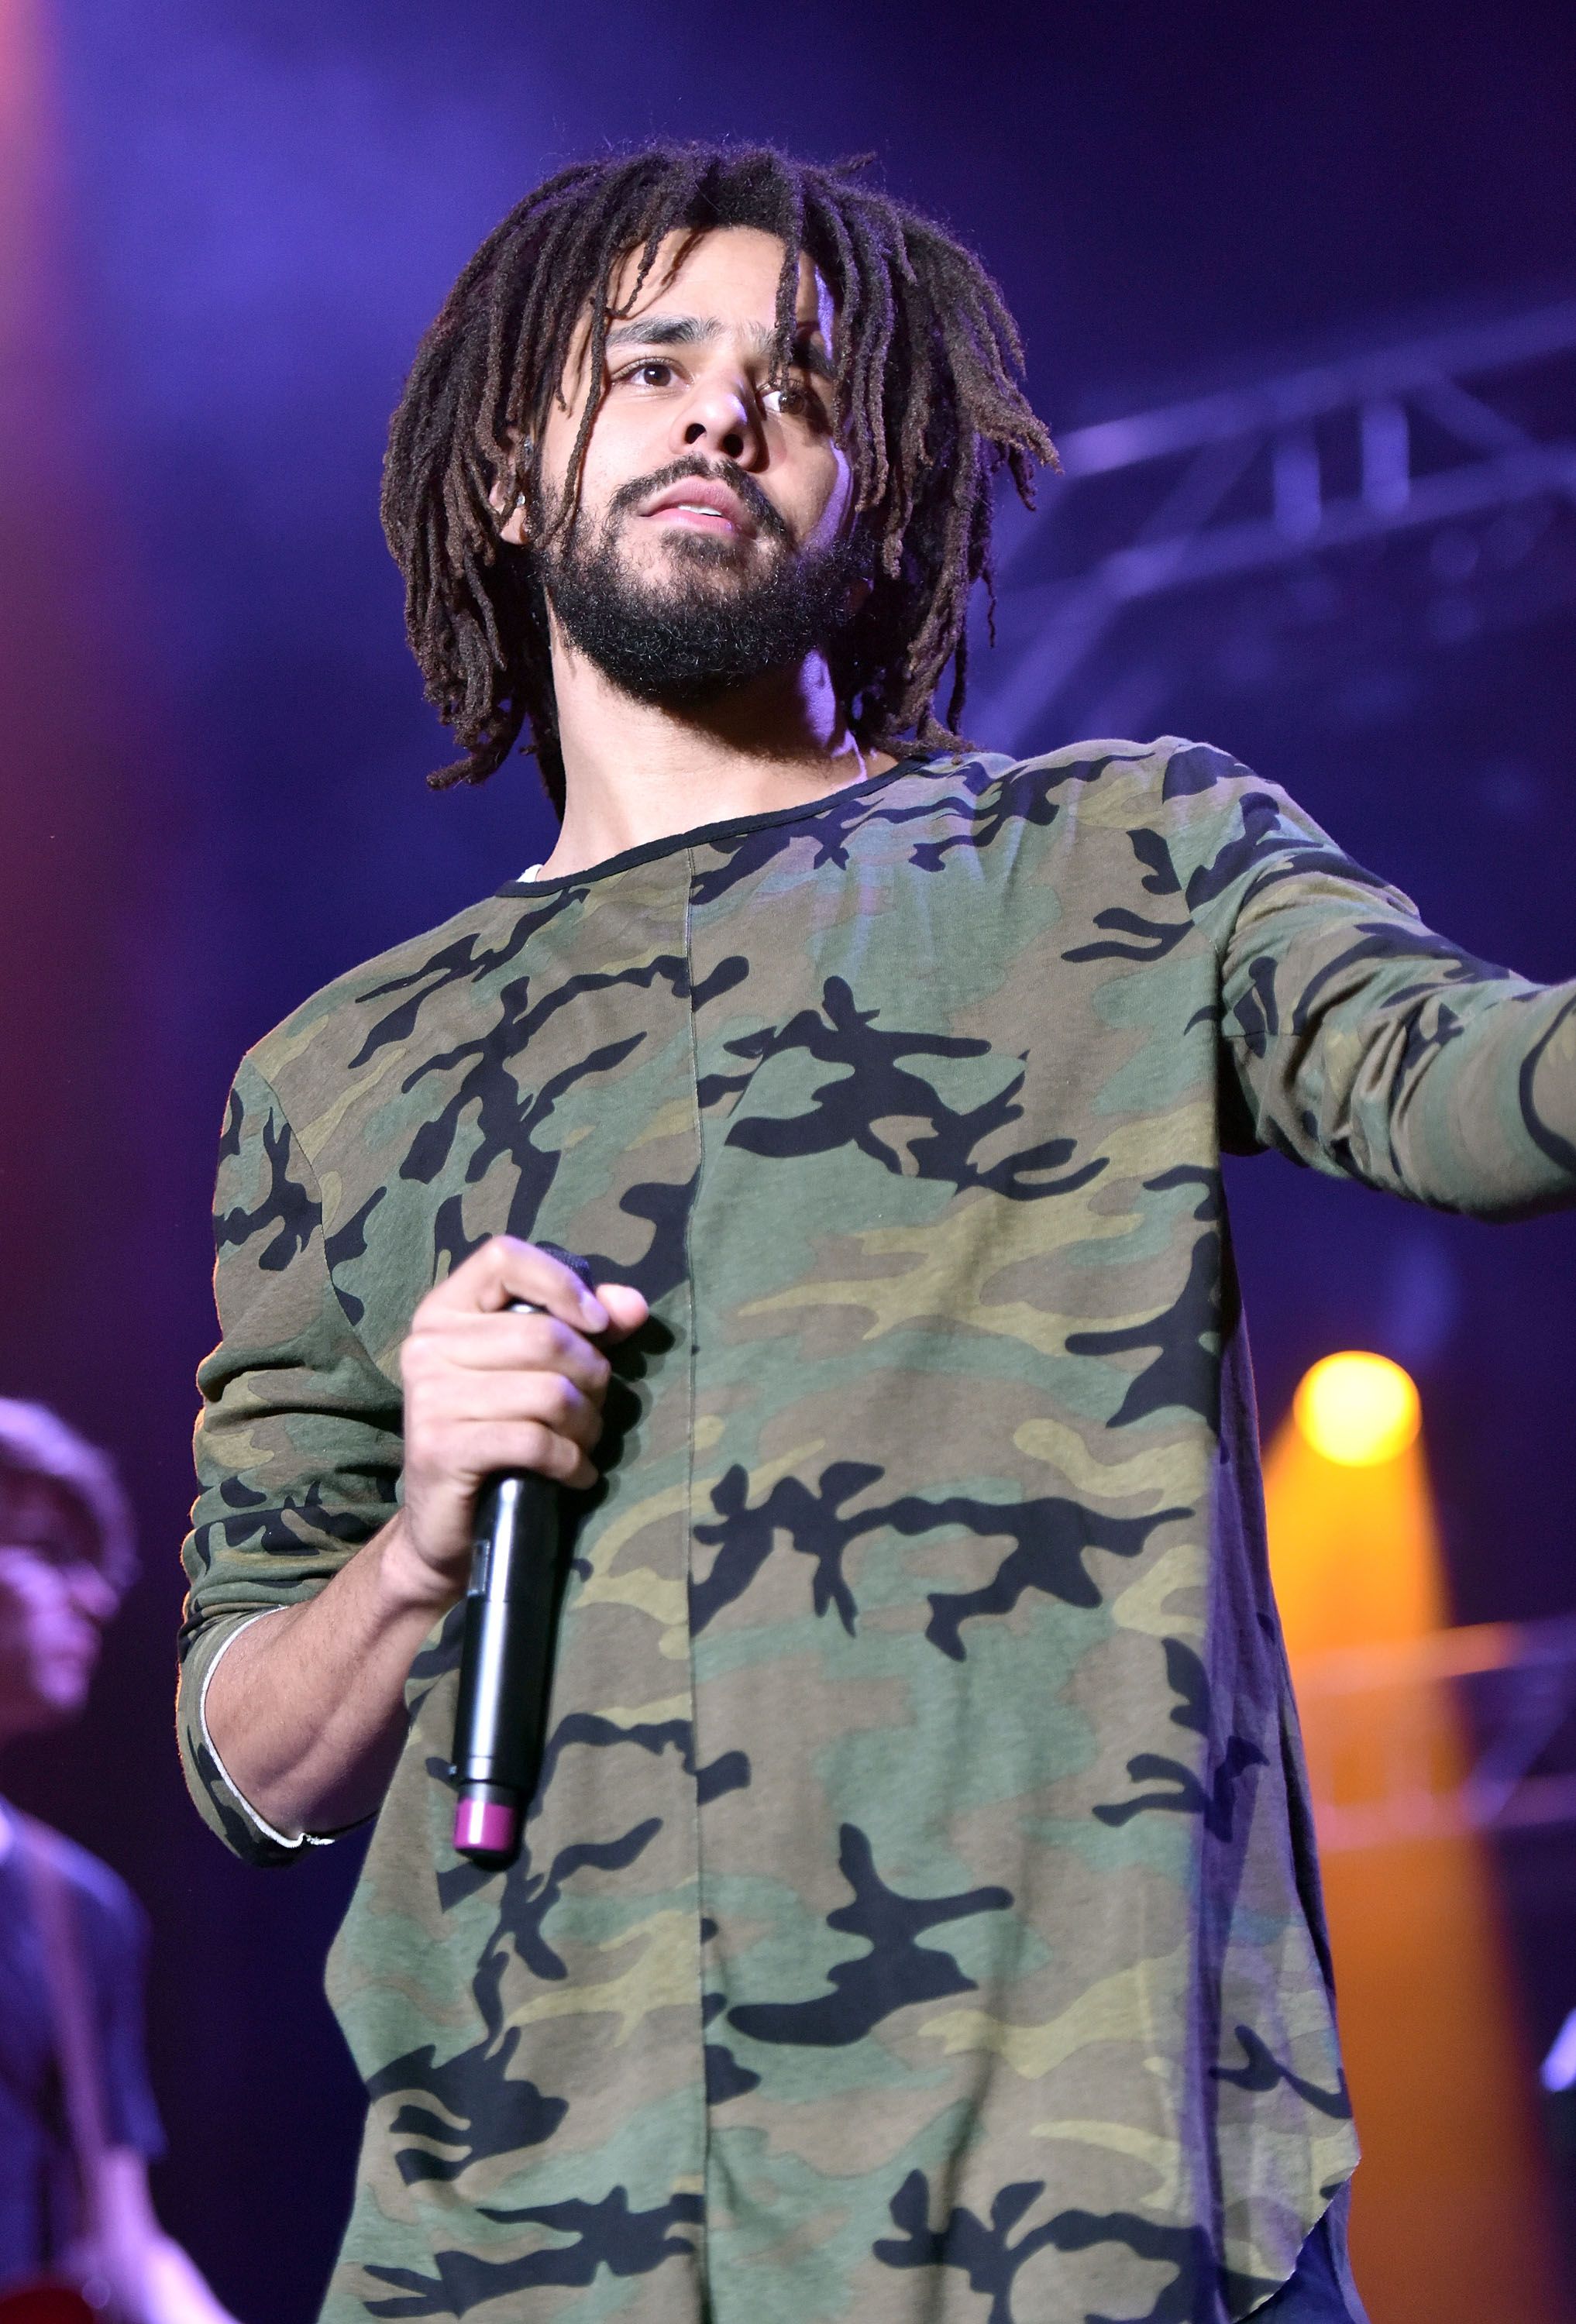 J. Cole during the Real 92.3 Real Show at The Forum on November 18, 2017, in Inglewood, California. | Source: Getty Images